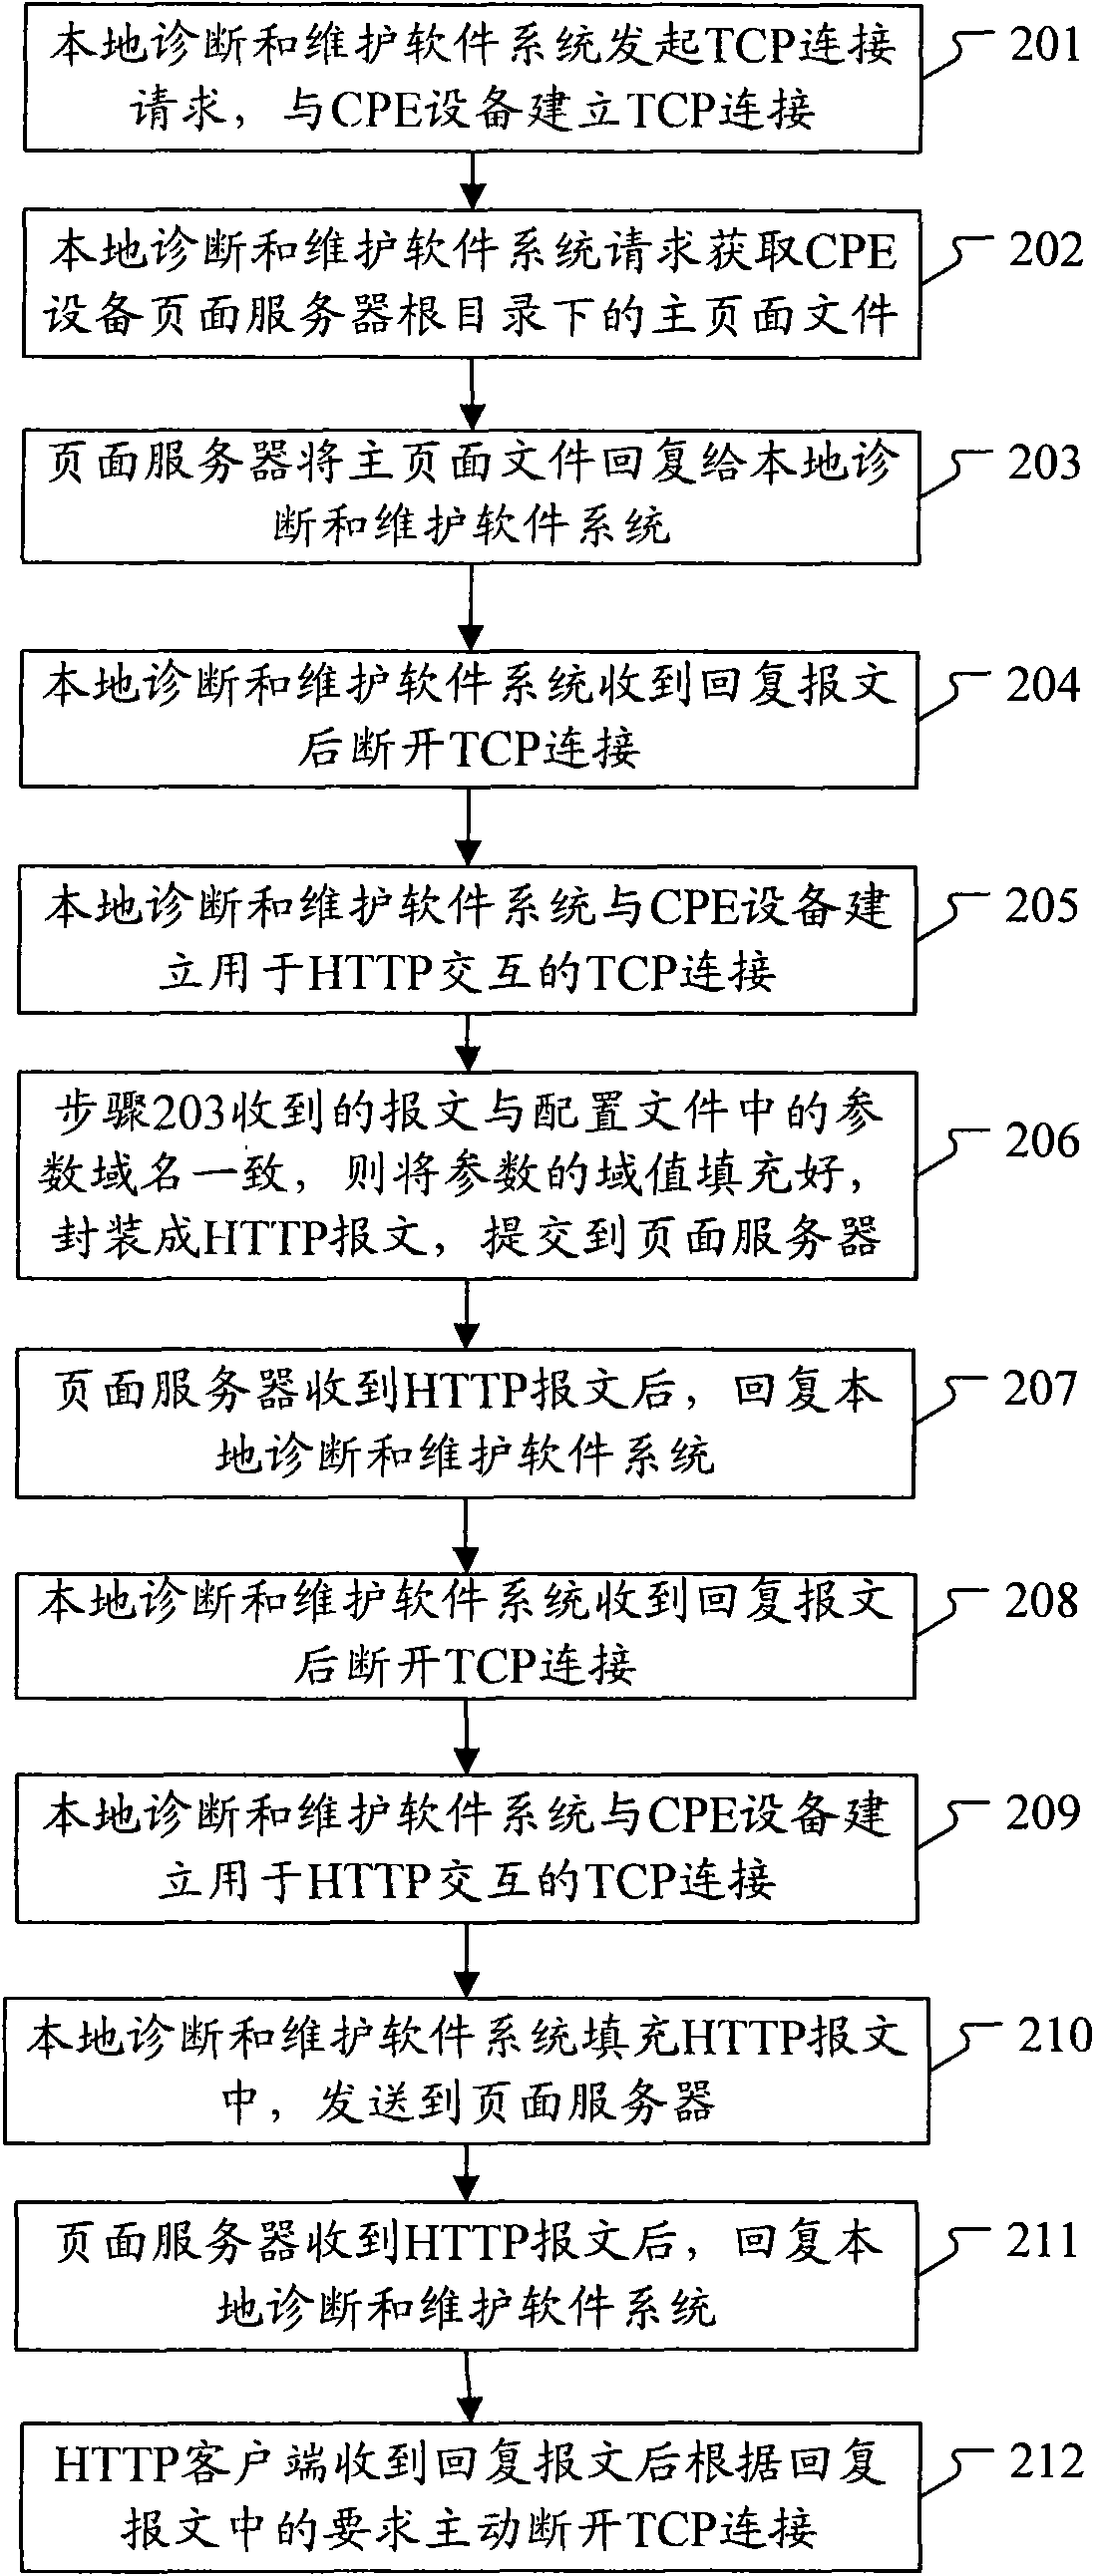 Local software diagnosing and maintaining system as well as corresponding method and system for diagnosis and maintenance